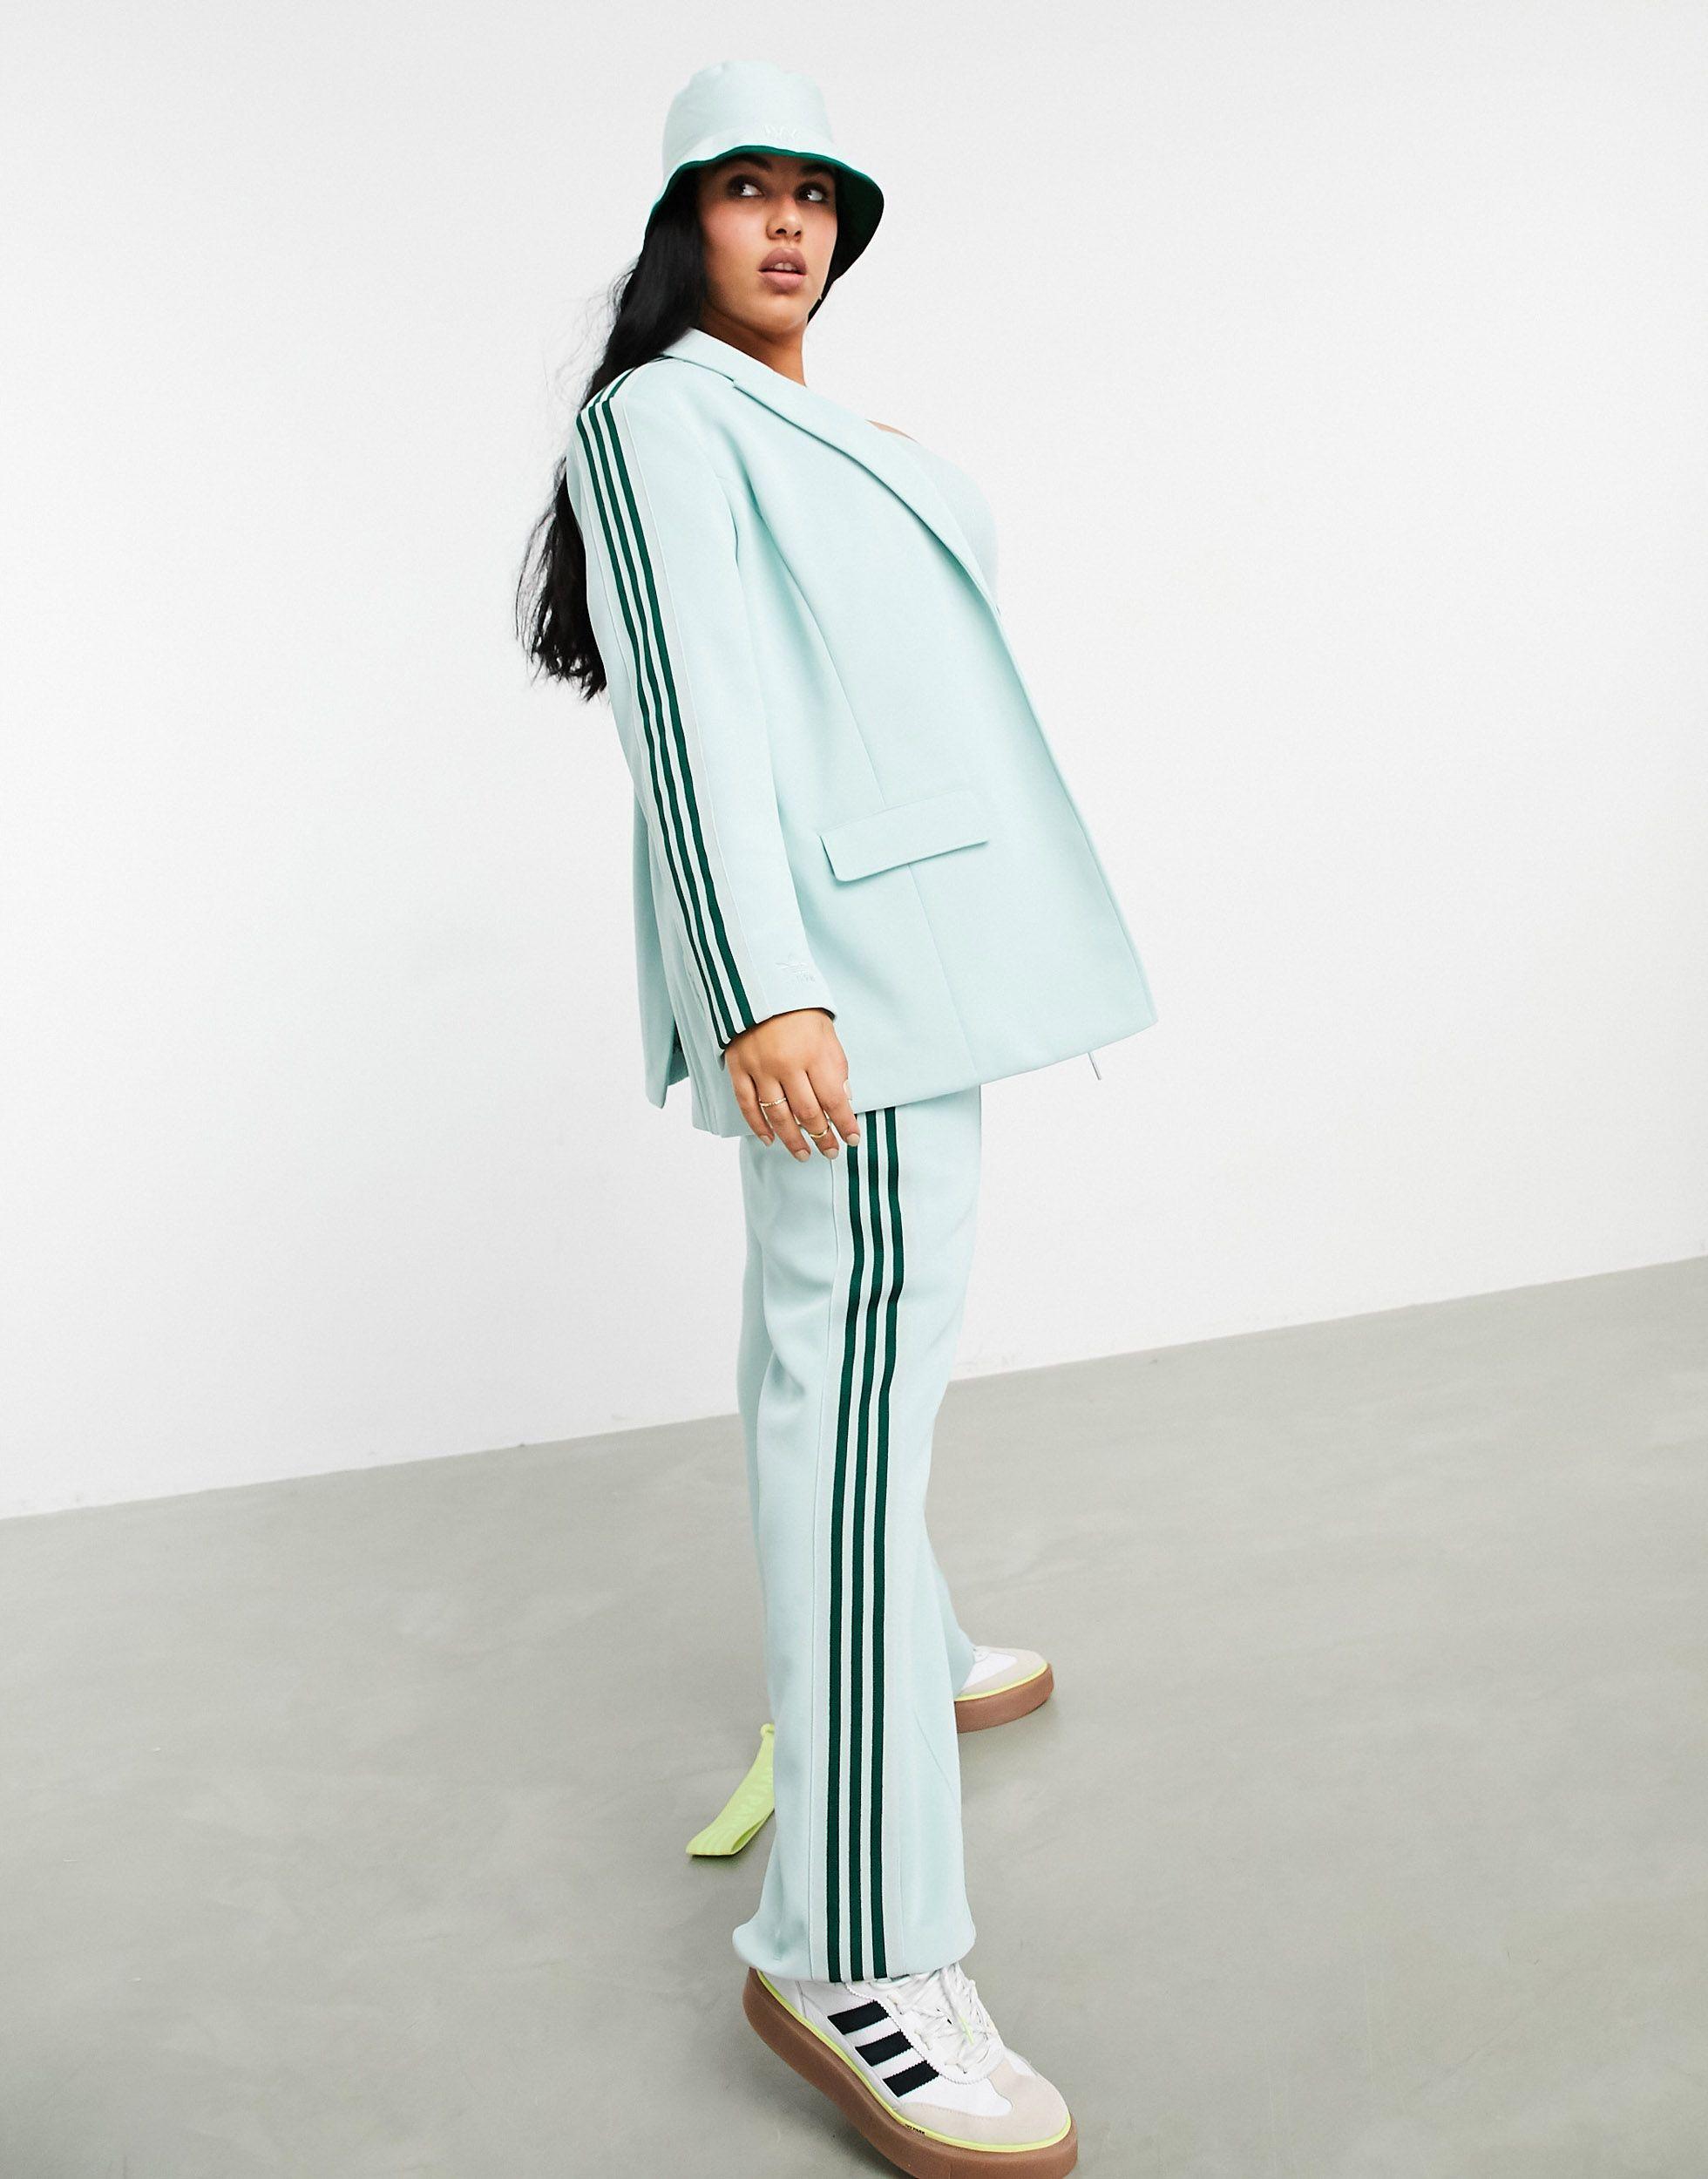 Ivy Park Synthetic Adidas X Plus Blazer in Green | Lyst